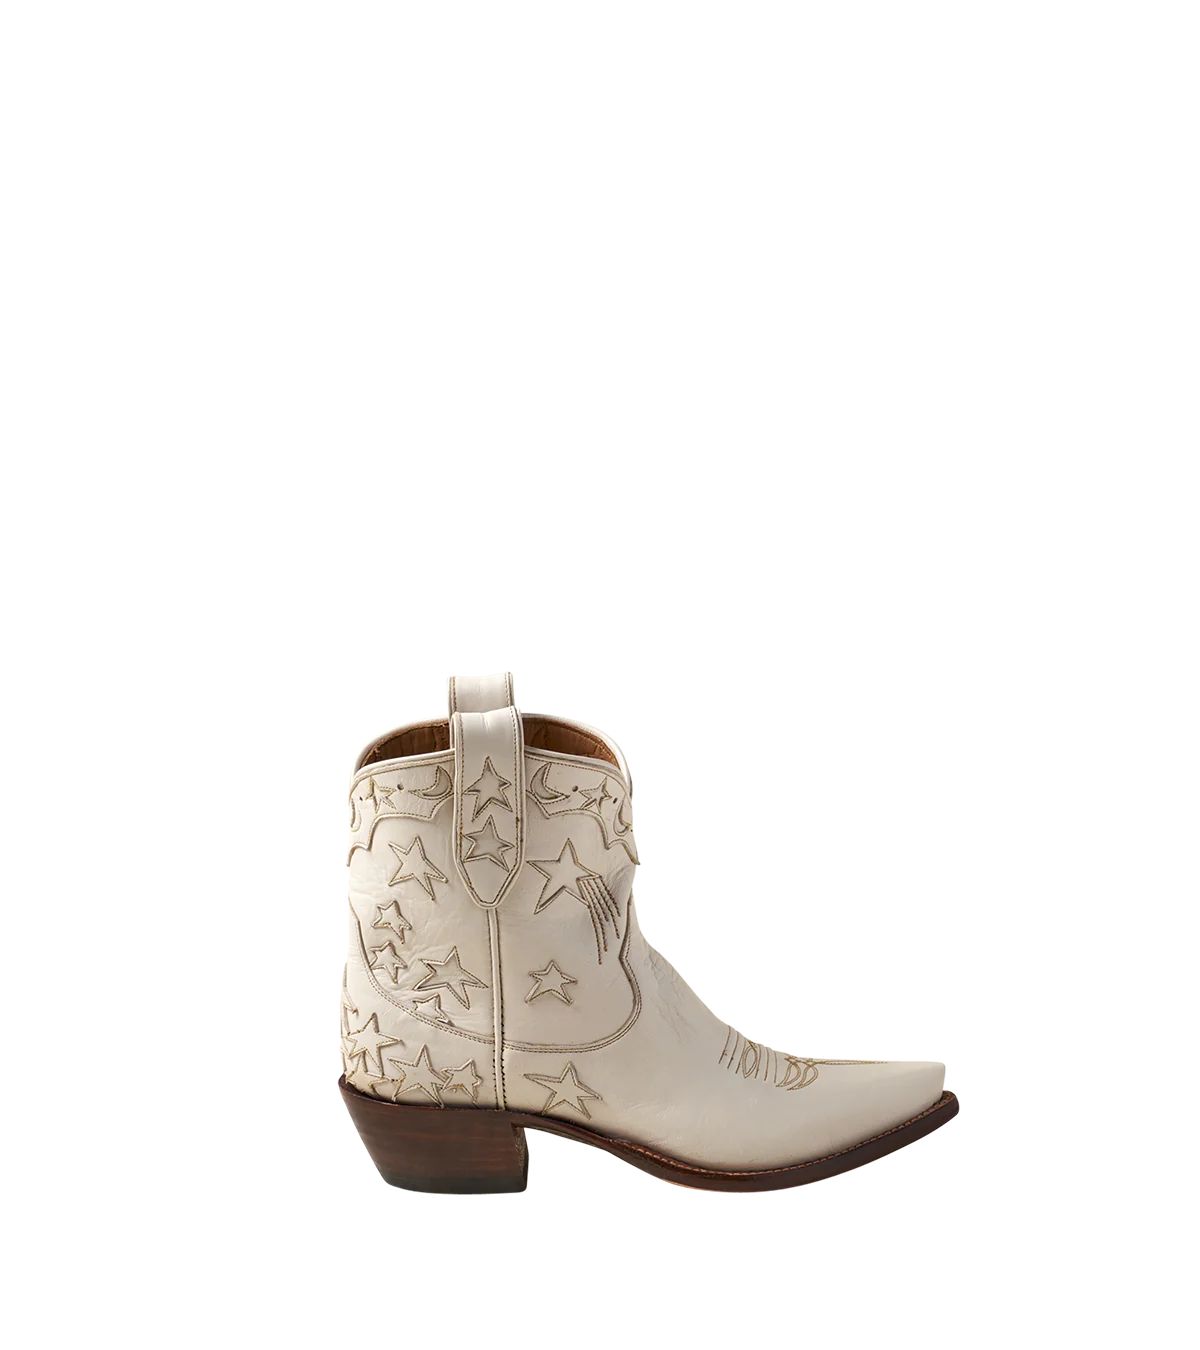 Brooke - Crème | Women’s Short Cowgirl Boot | Miron Crosby | Miron Crosby